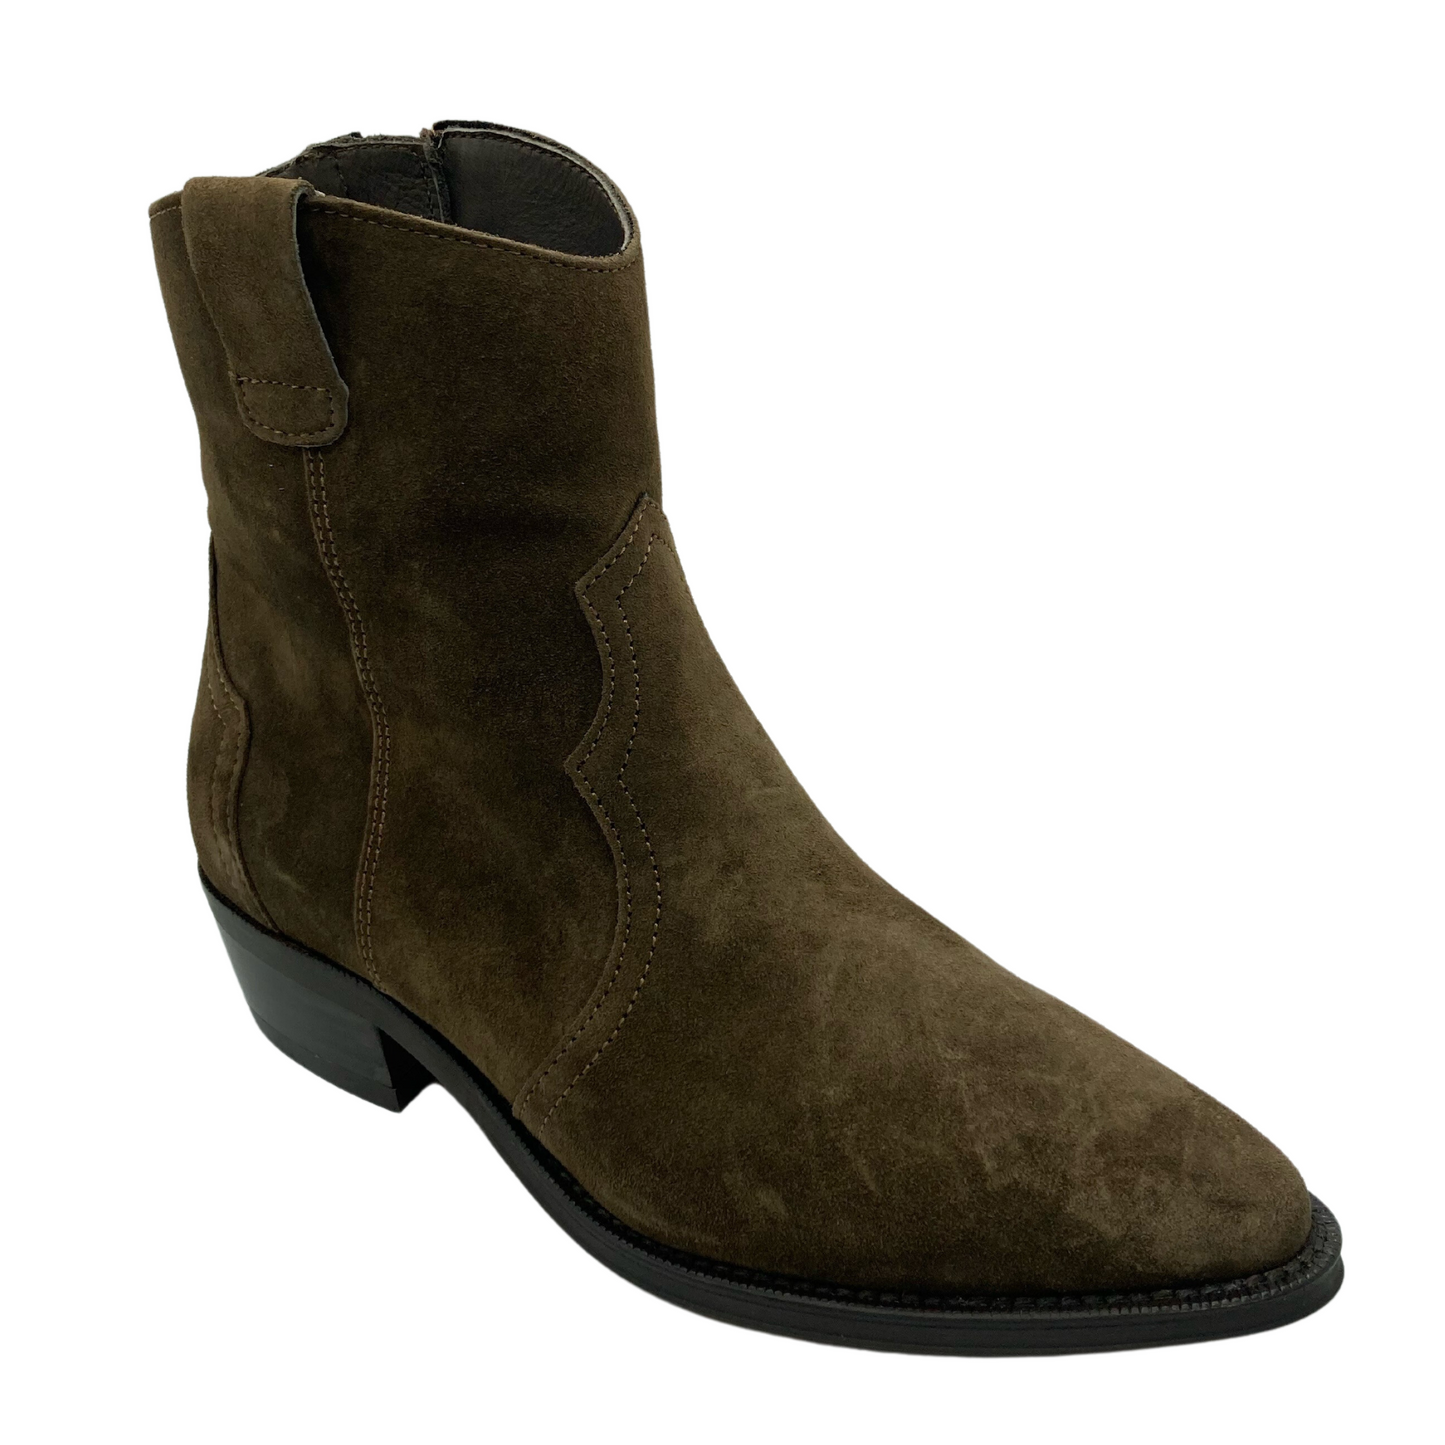 45 degree angled view of brown suede western boot with almond toe and stacked heel